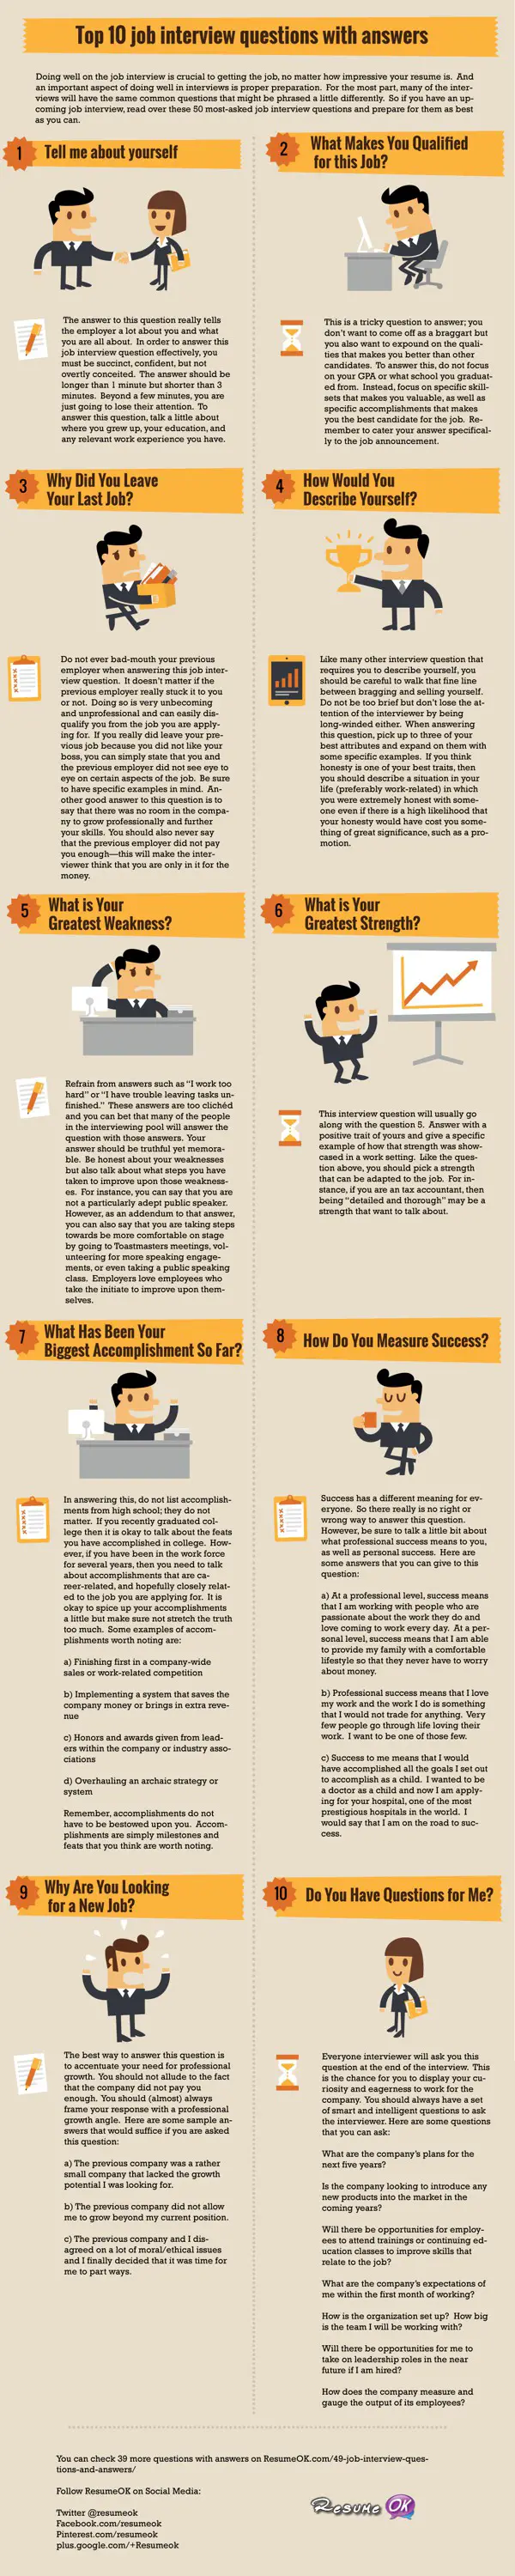 10 commonly asked job interview questions